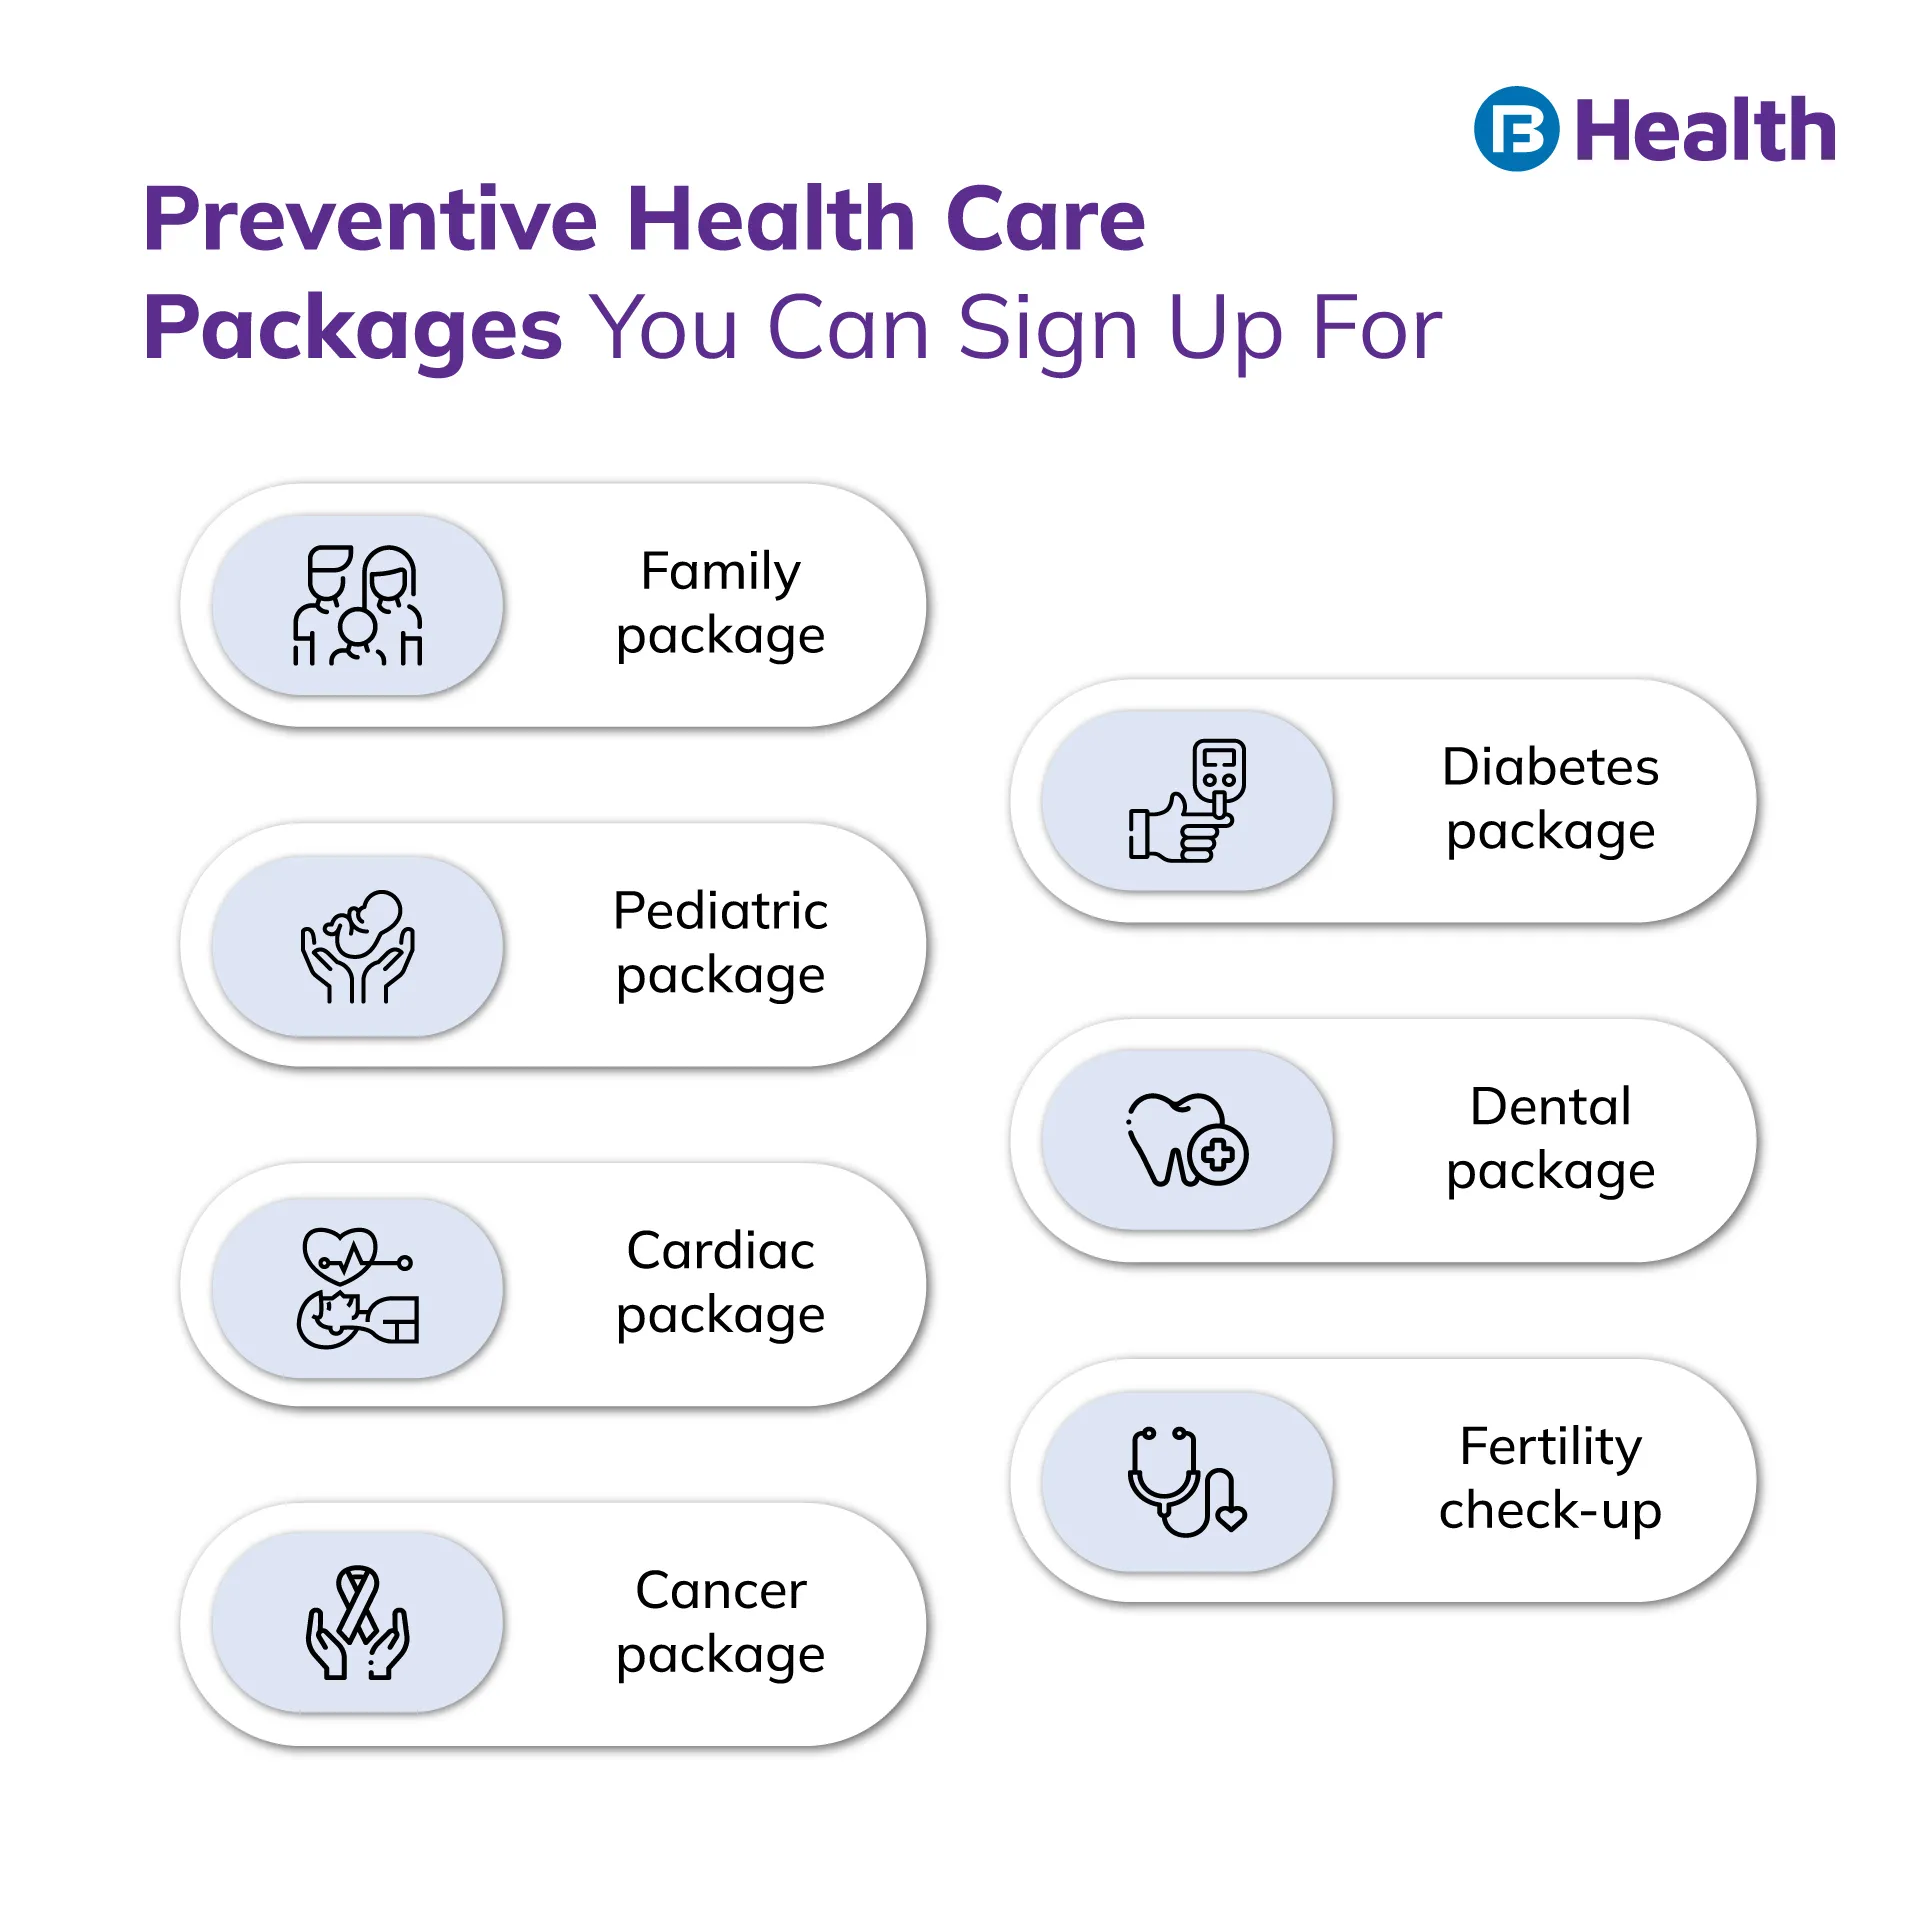 Preventive Health care packages